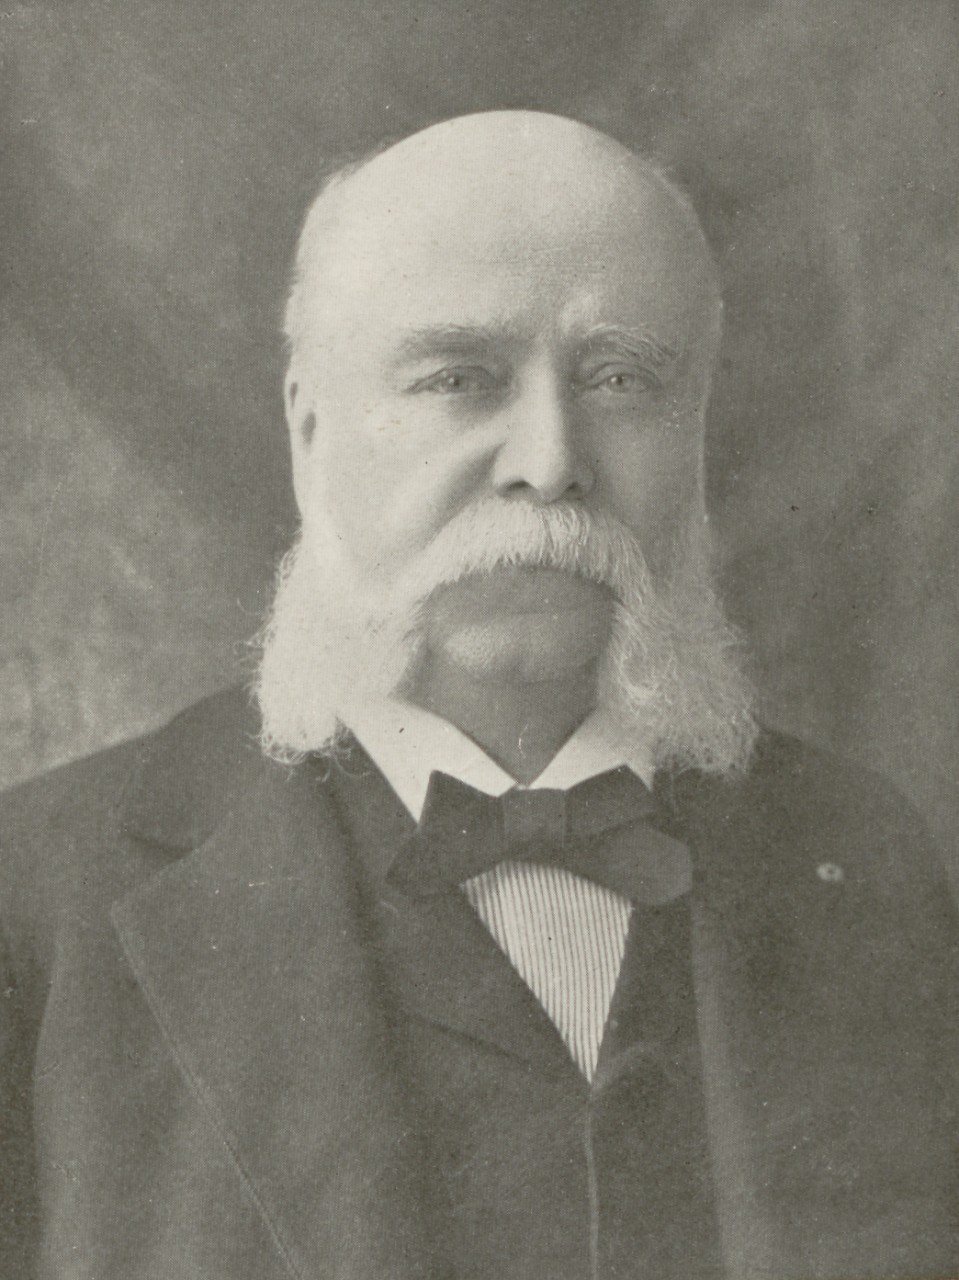 A photo of Stewart L. Woodford who was the American ambassador to Spain before the Spanish-American War.